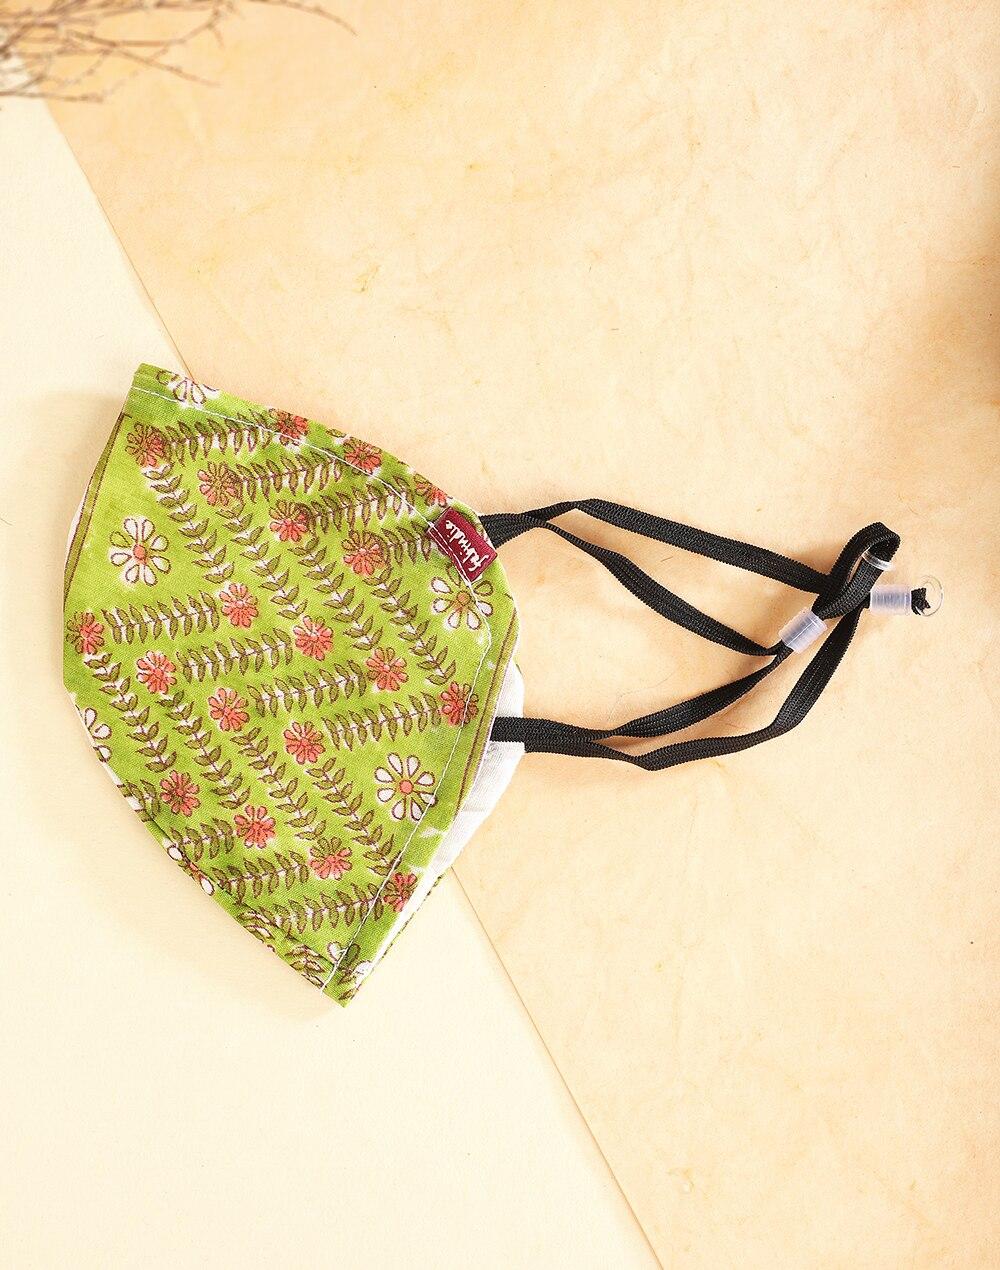 fabric-printed-non-surgical-mask